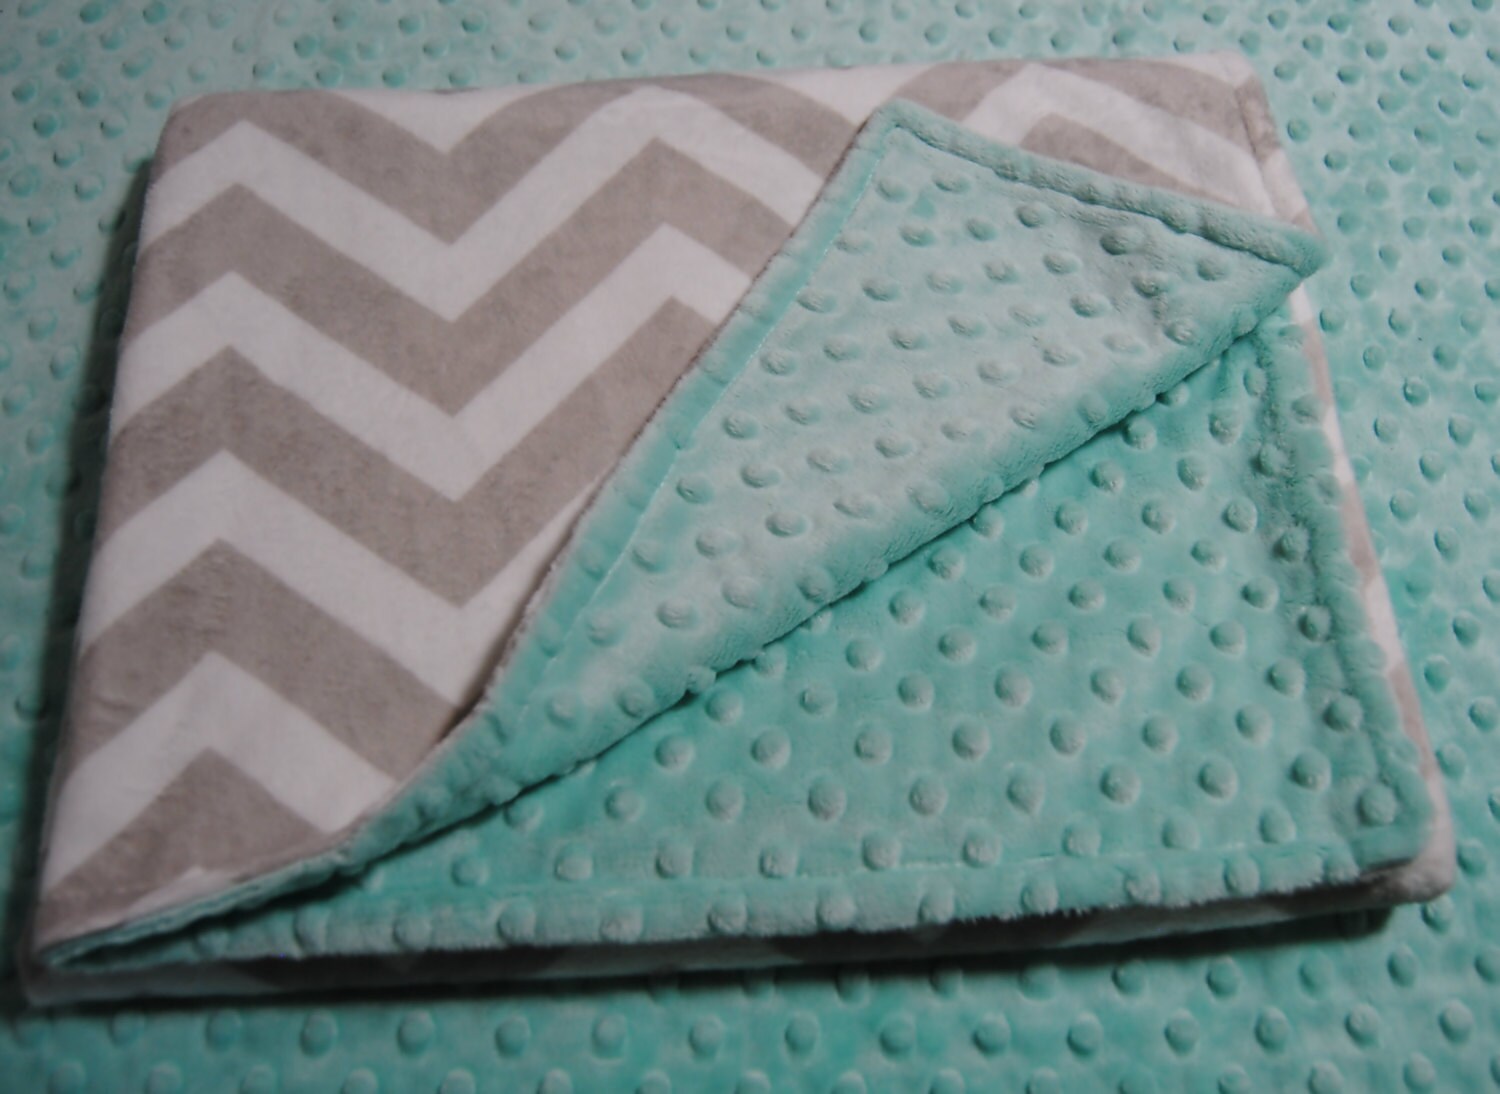 Mint green, white and grey crochet baby blanket | Mint ...